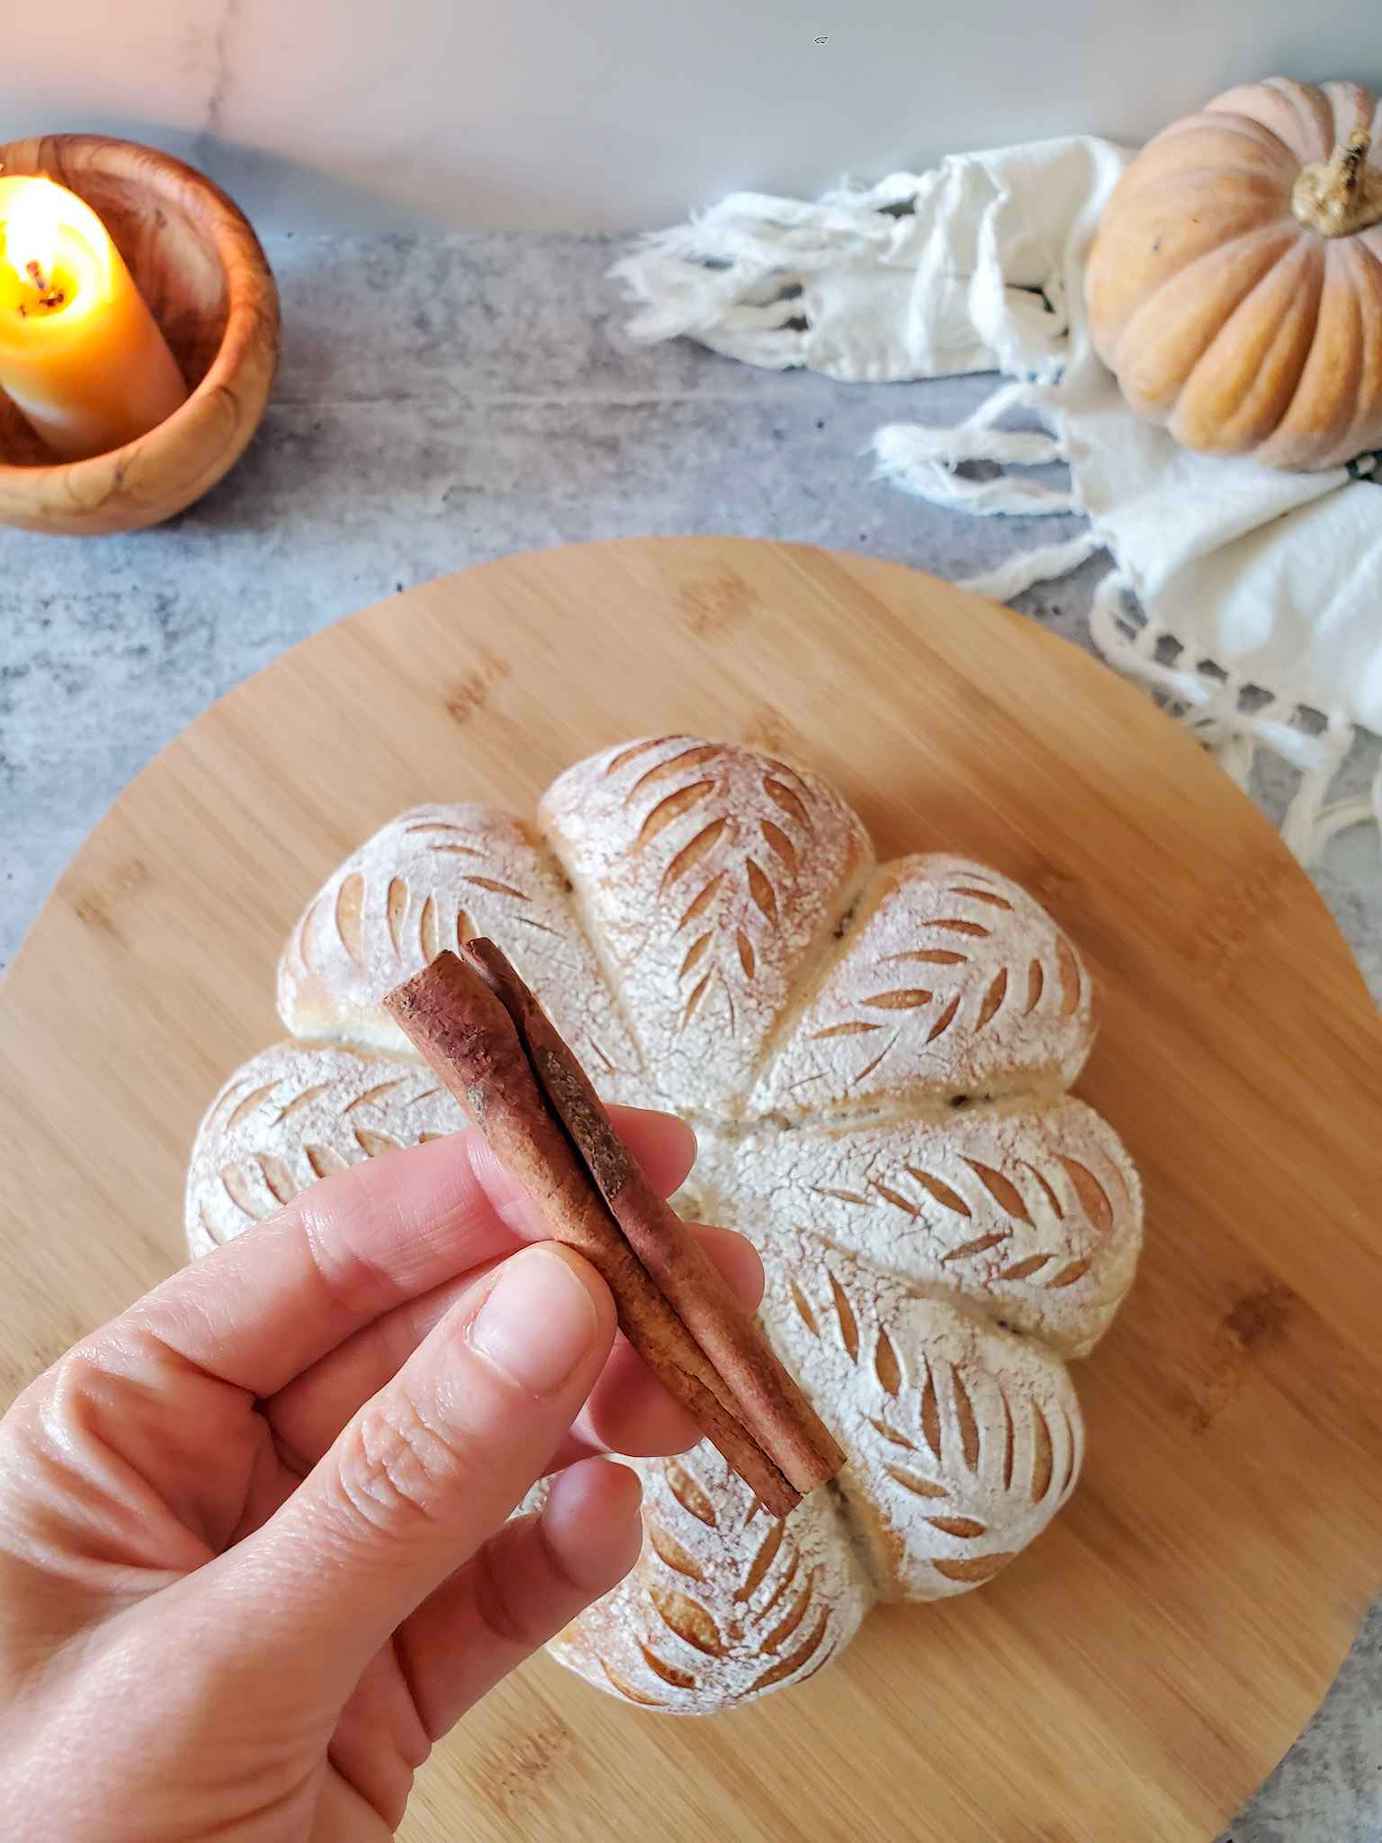 A hand is holding a cinnamon stick that will be used as a stem for the loaf of bread that sits below on a circular wood surface. 